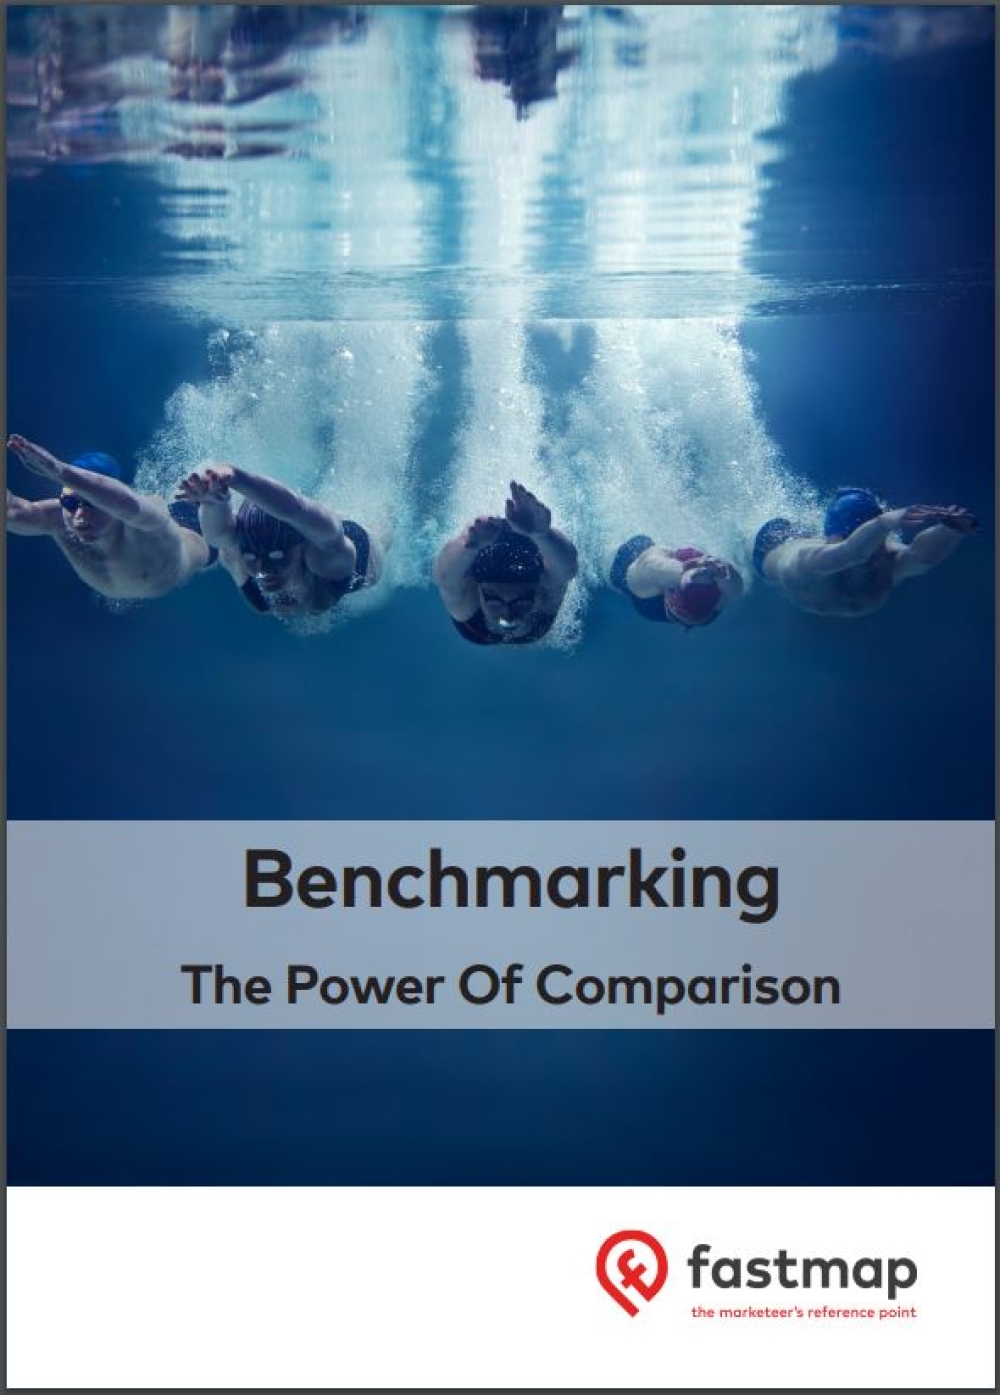 T-benchmarking-guide-cover-131.jpg